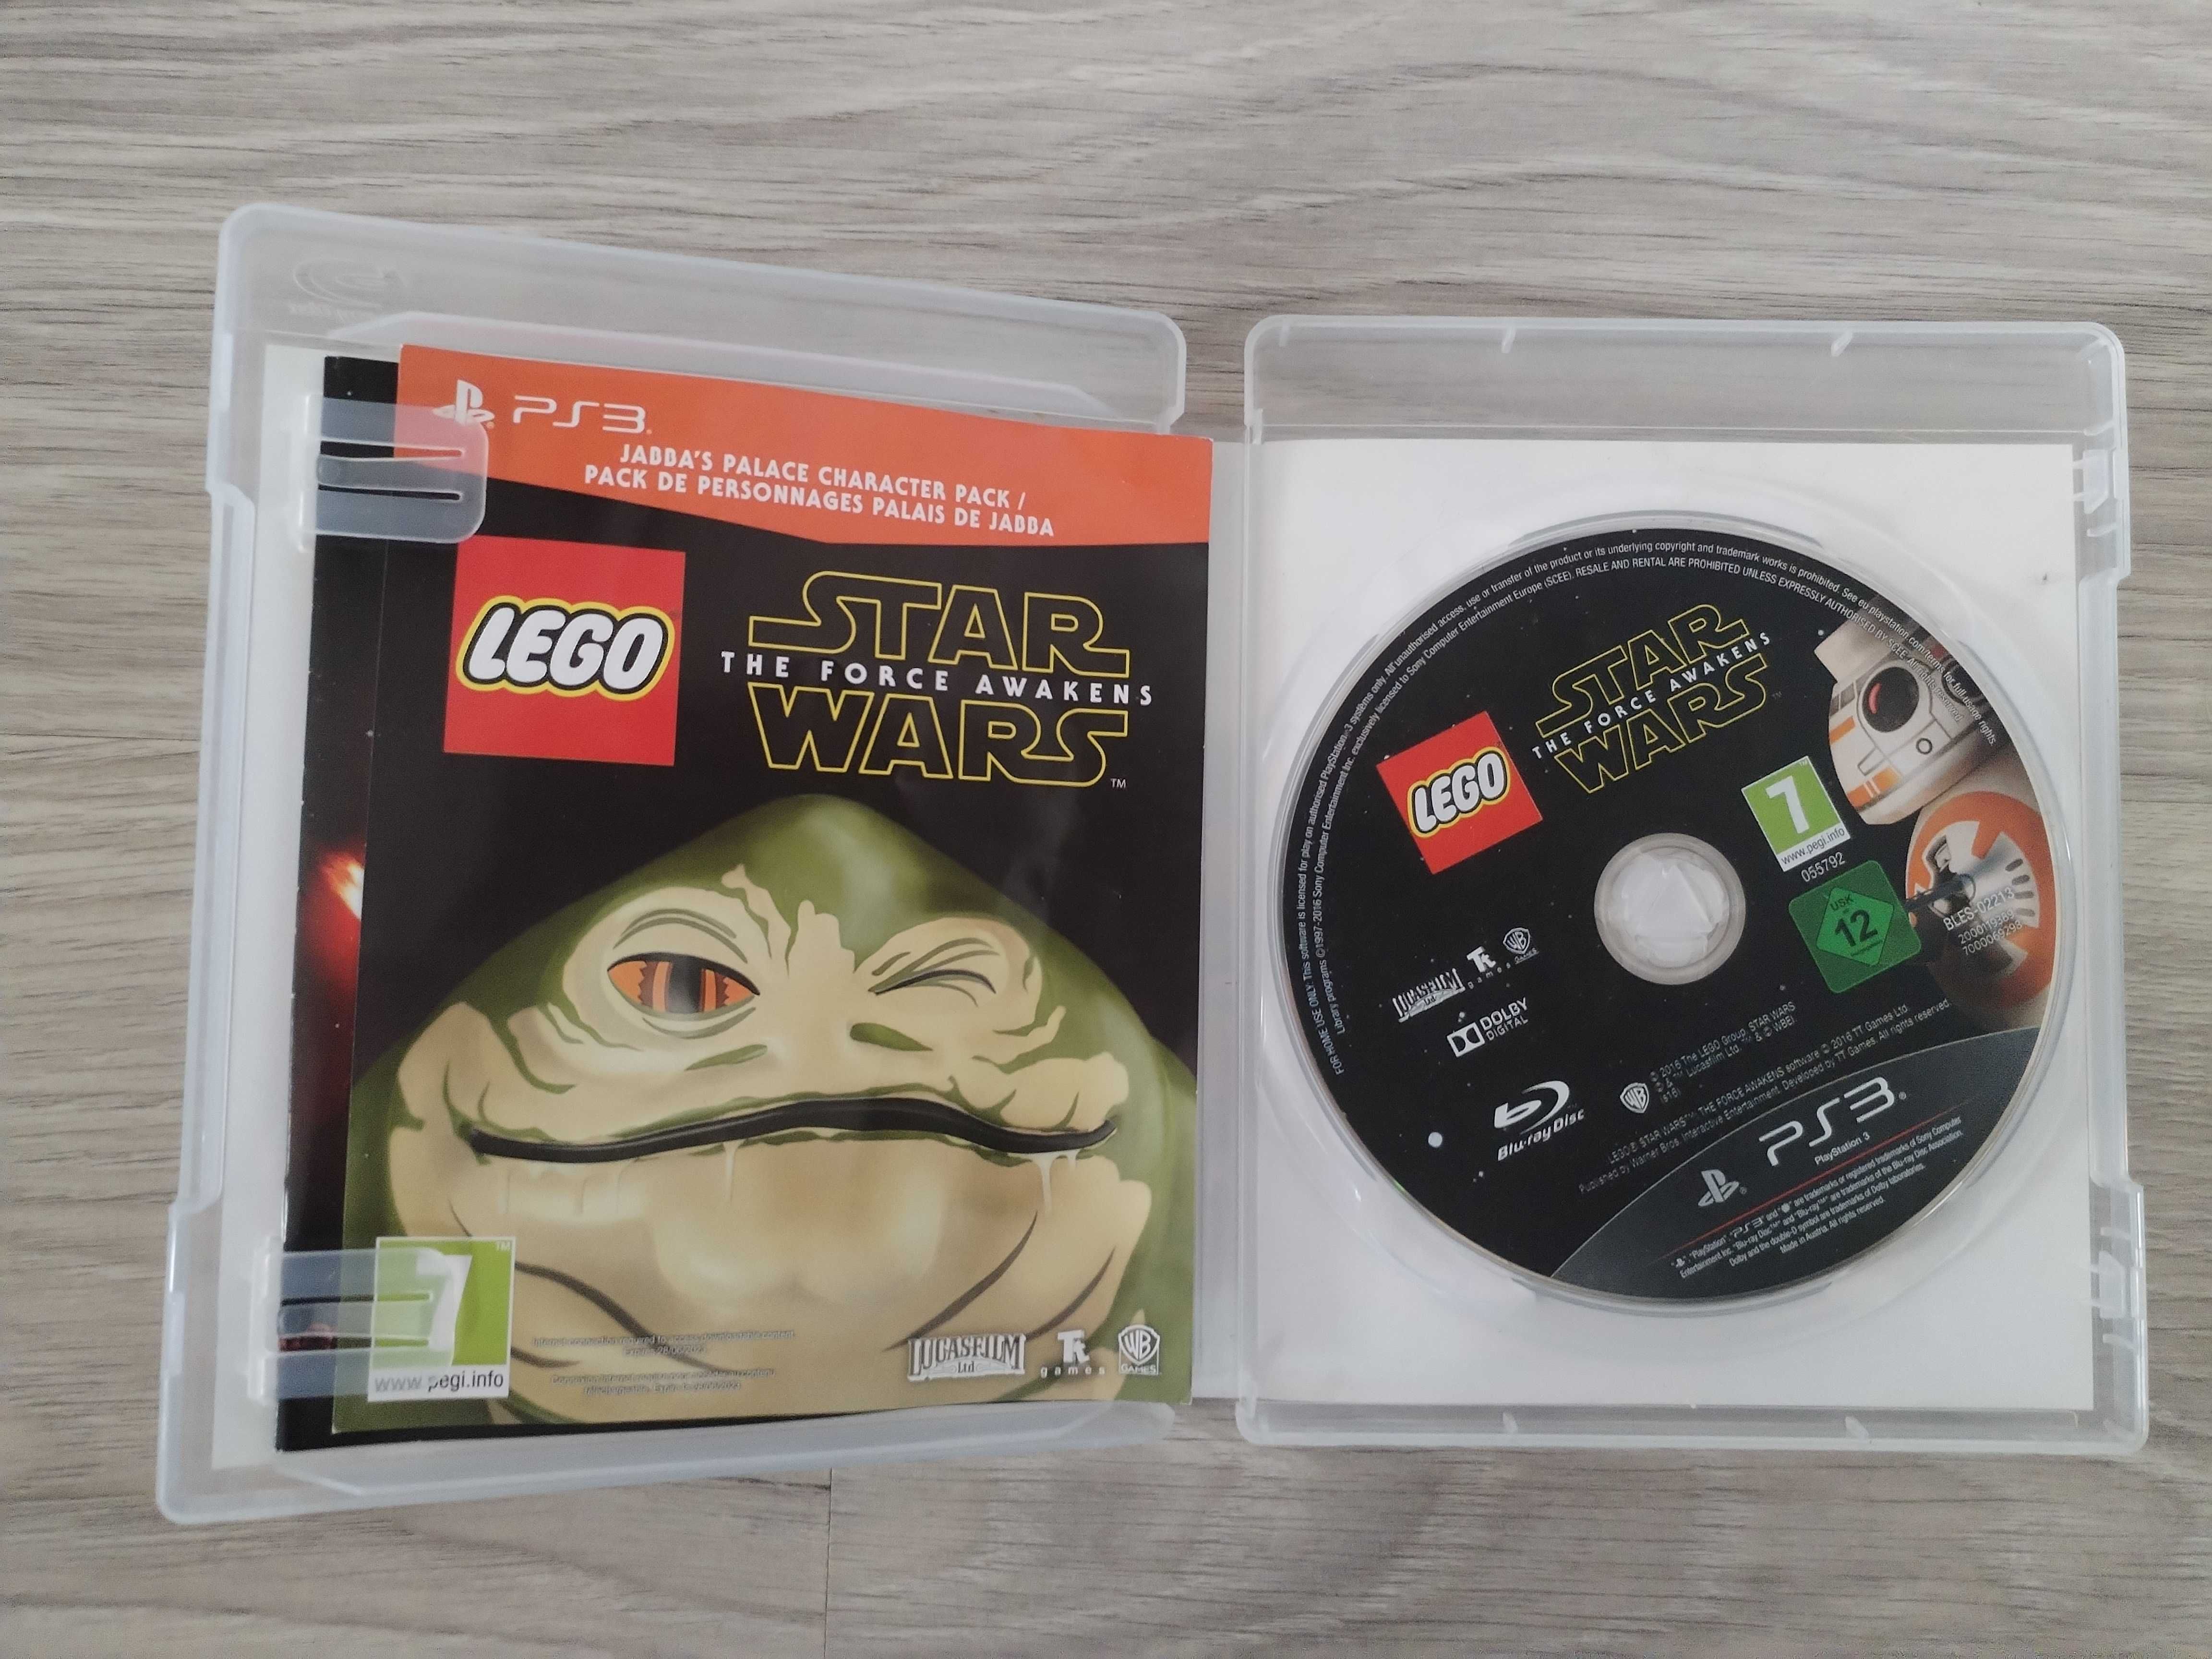 Lego Star Wars The Force Awakens Playstation 3 PS3